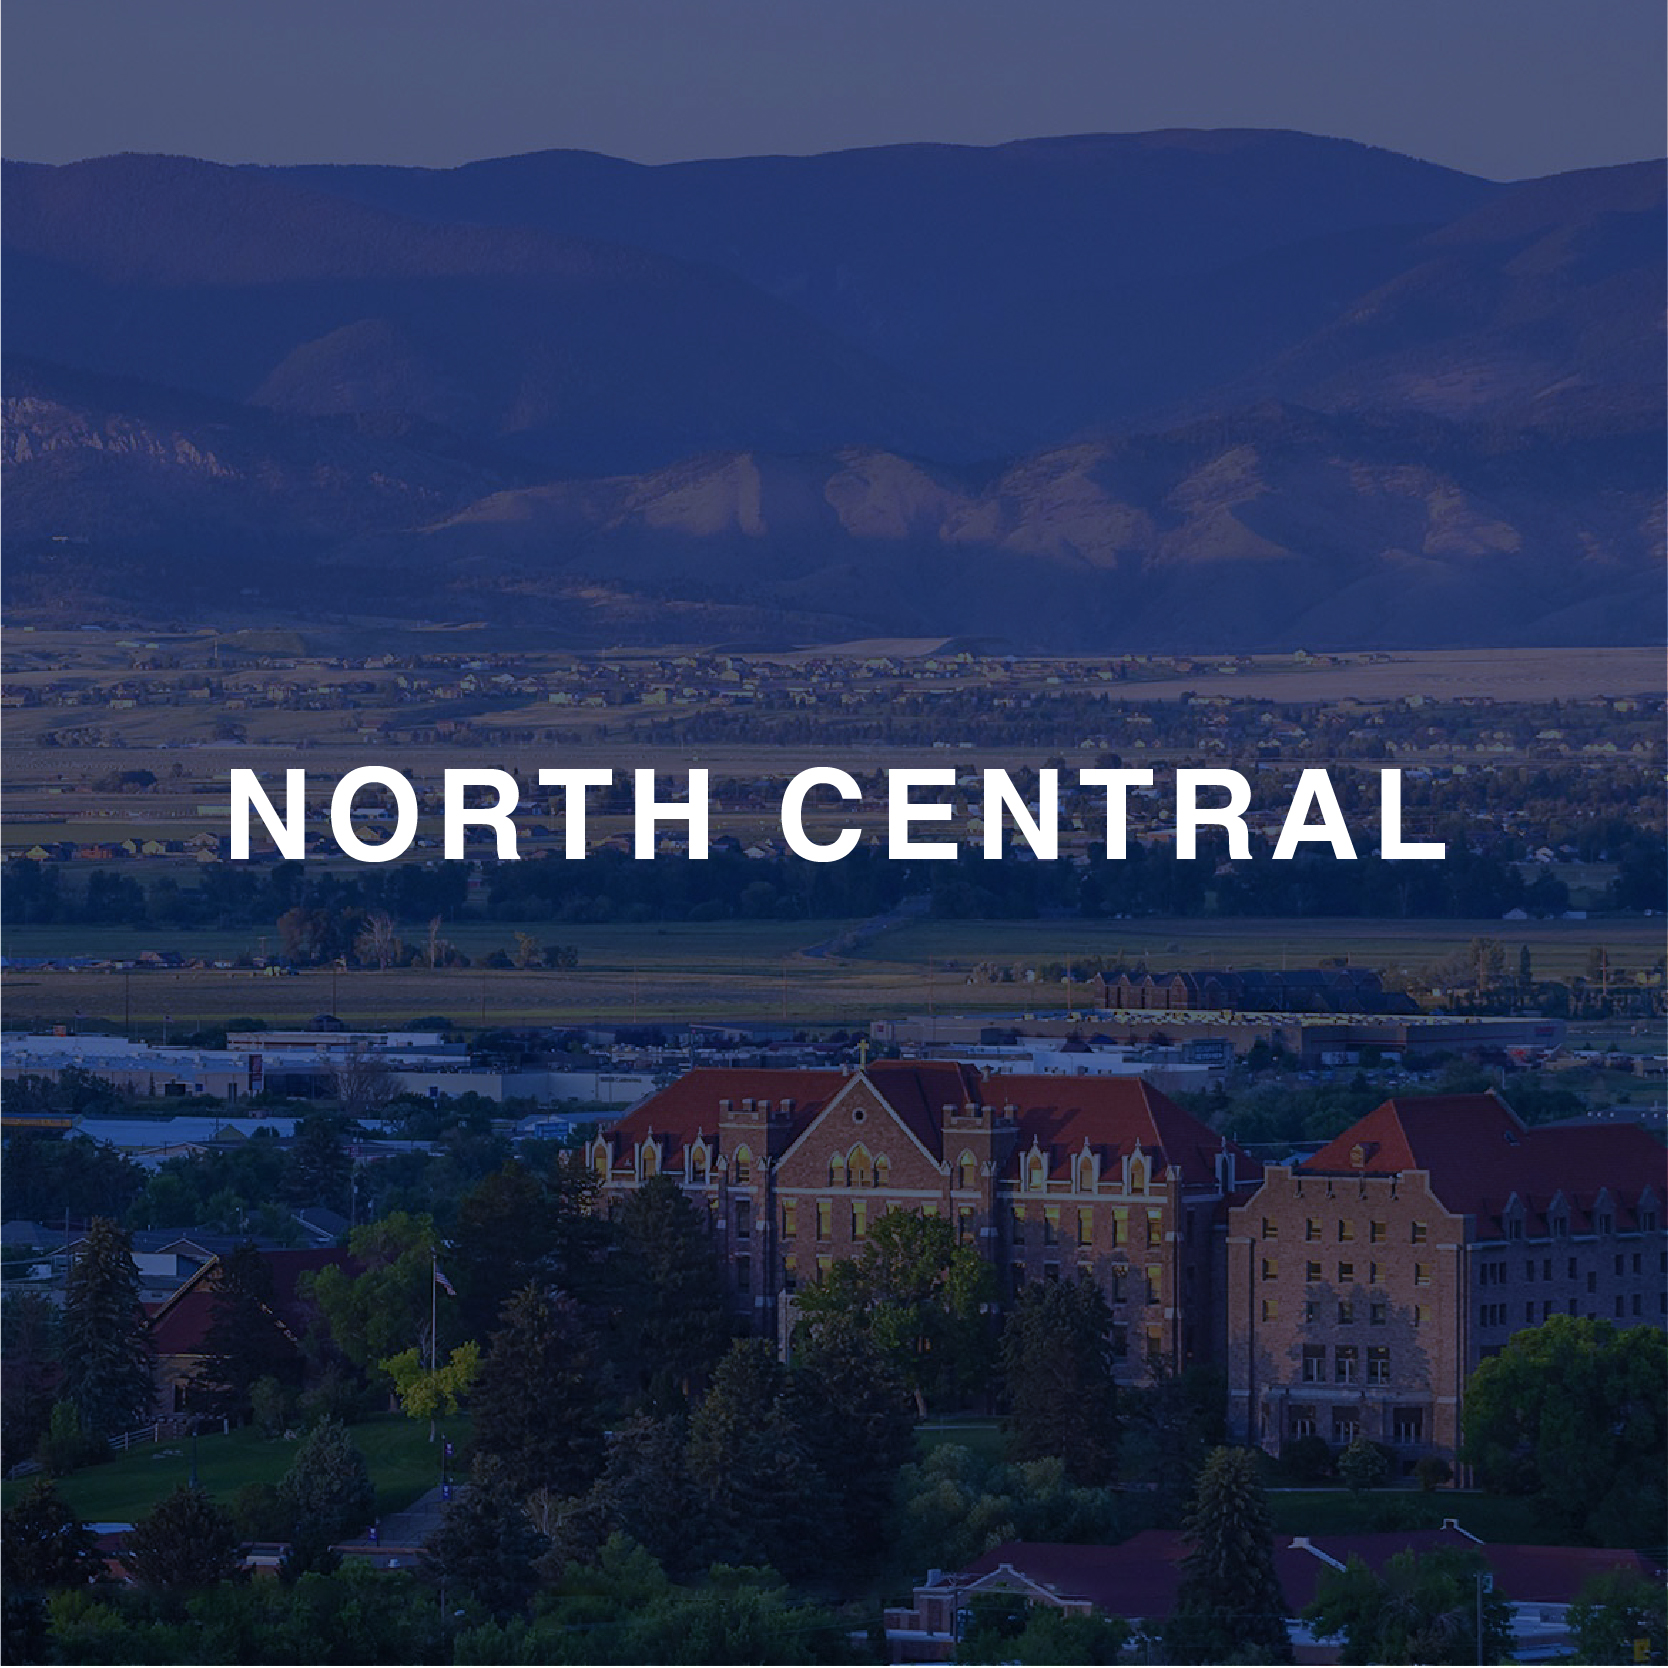 North Central